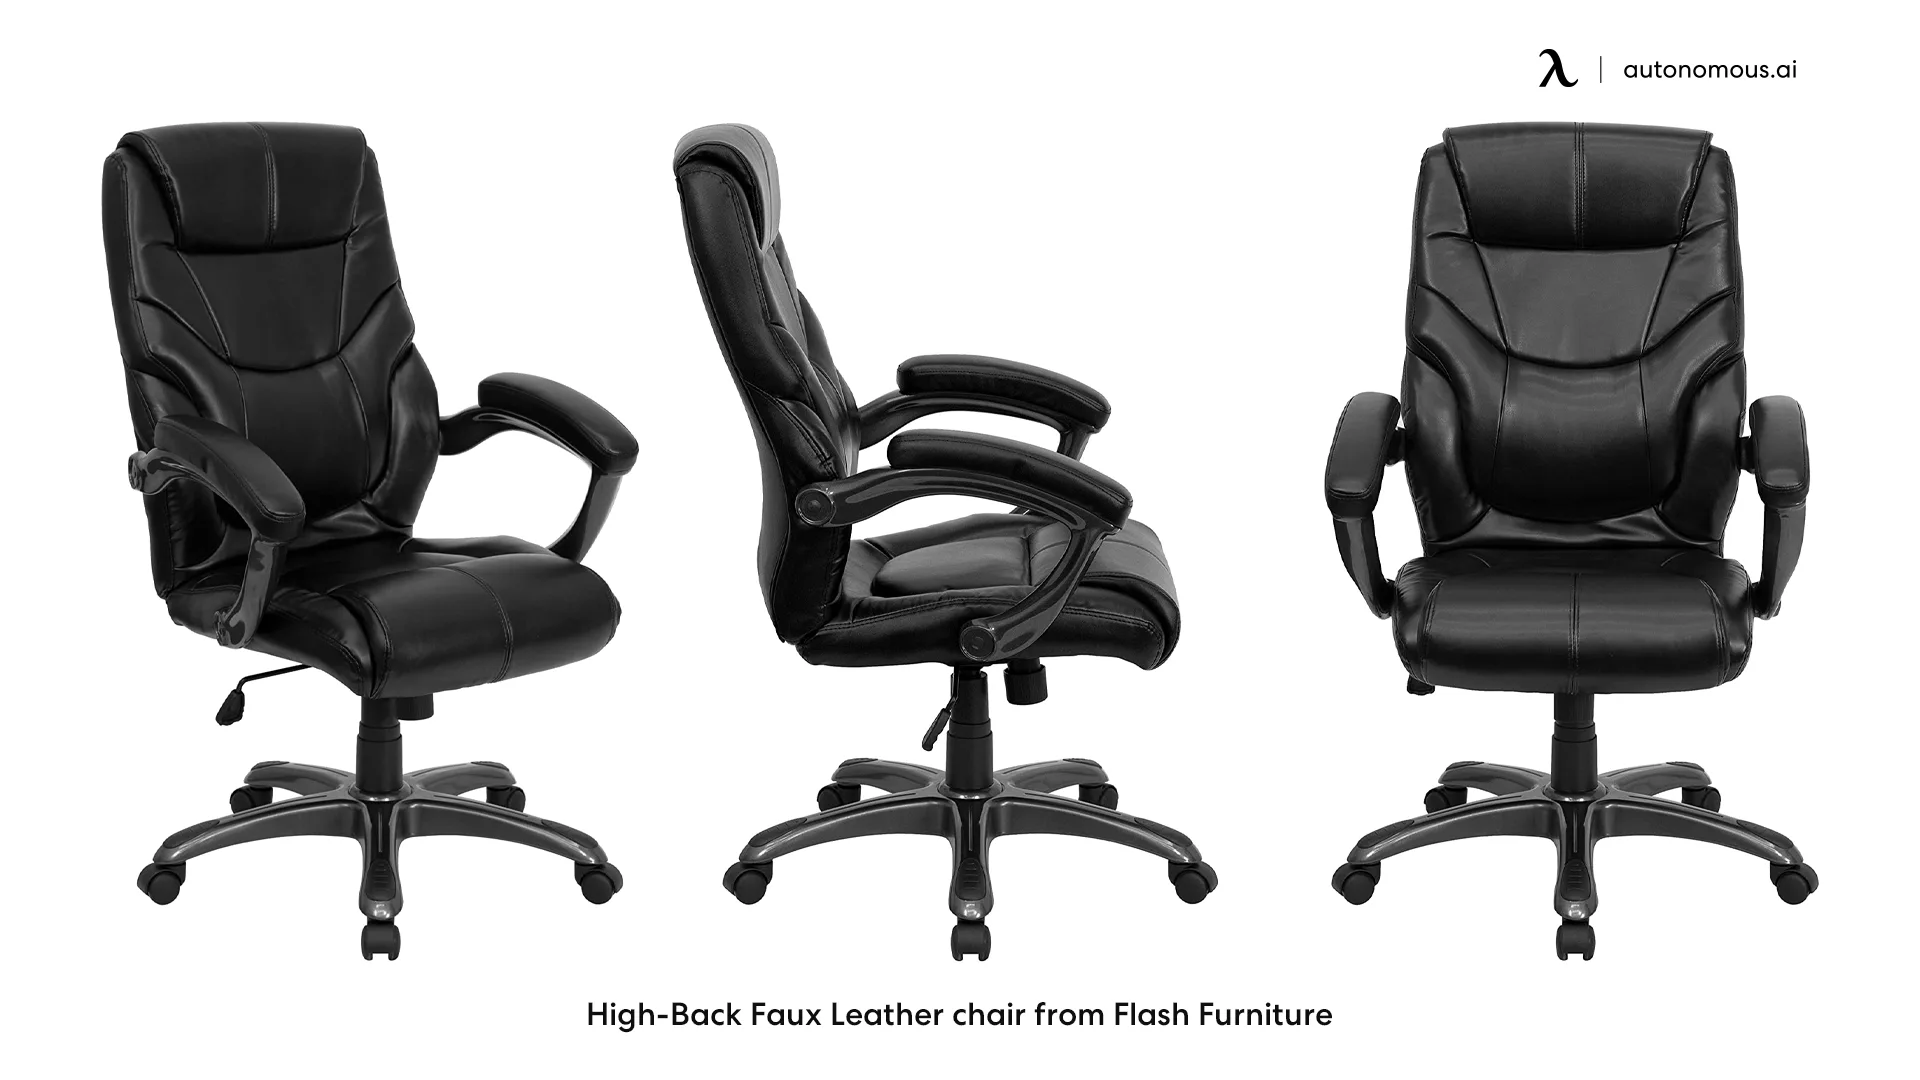 High-Back Faux Leather chair from Flash Furniture